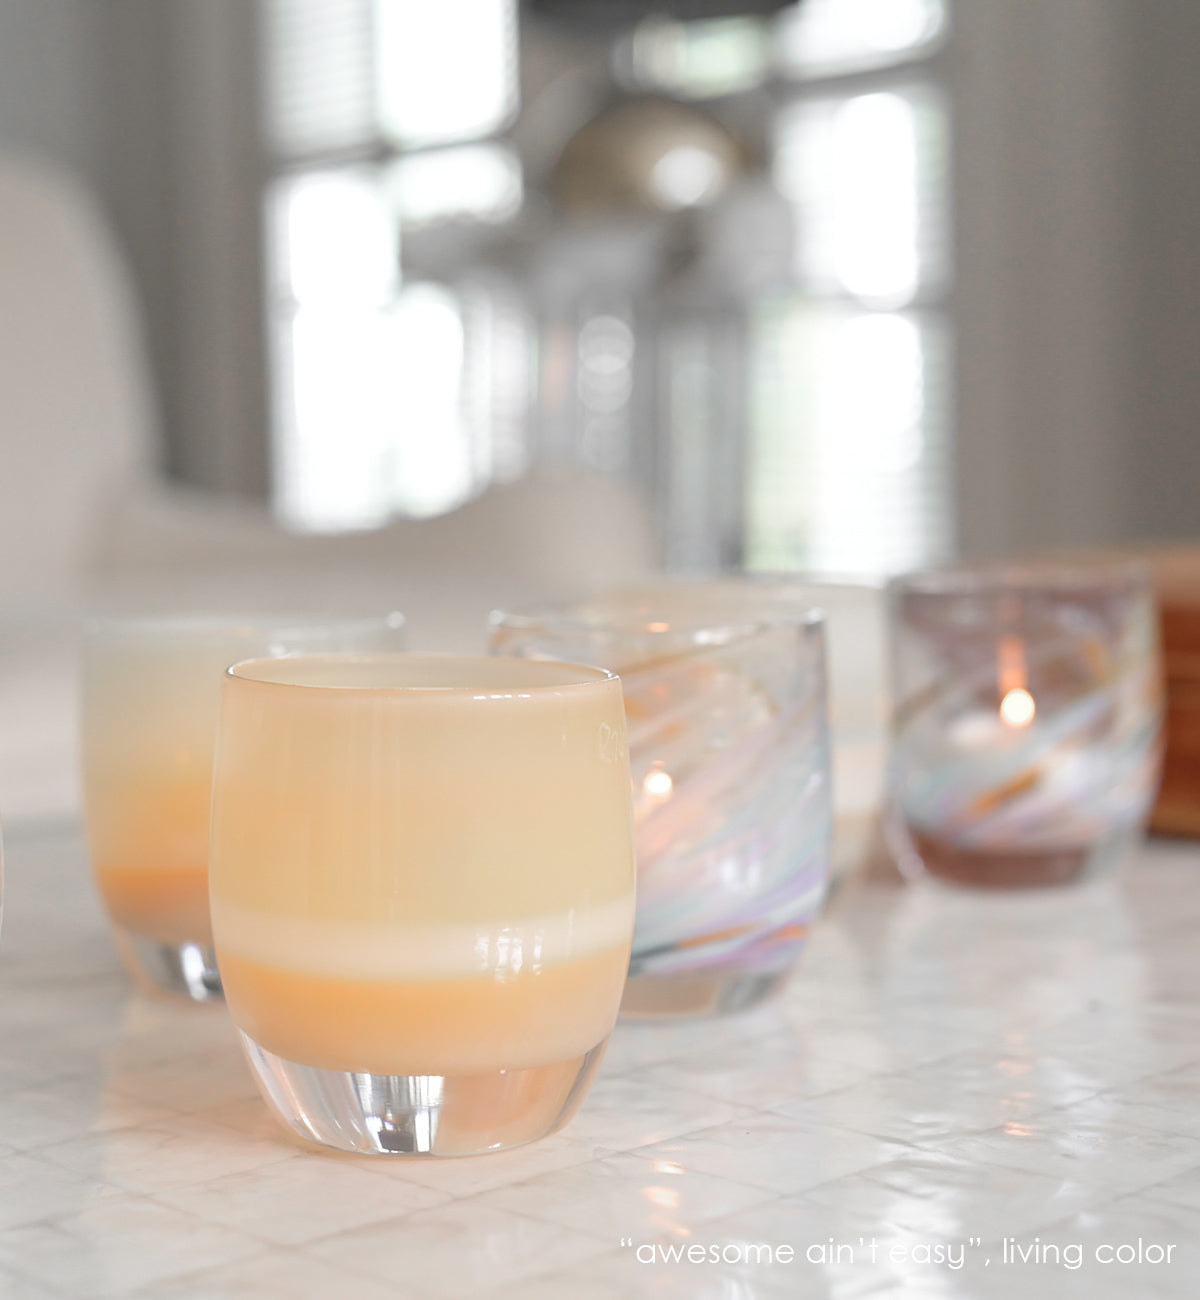 awesome ain't easy sandy yellow hand-blown glass votive candle holder. Paired with living color.